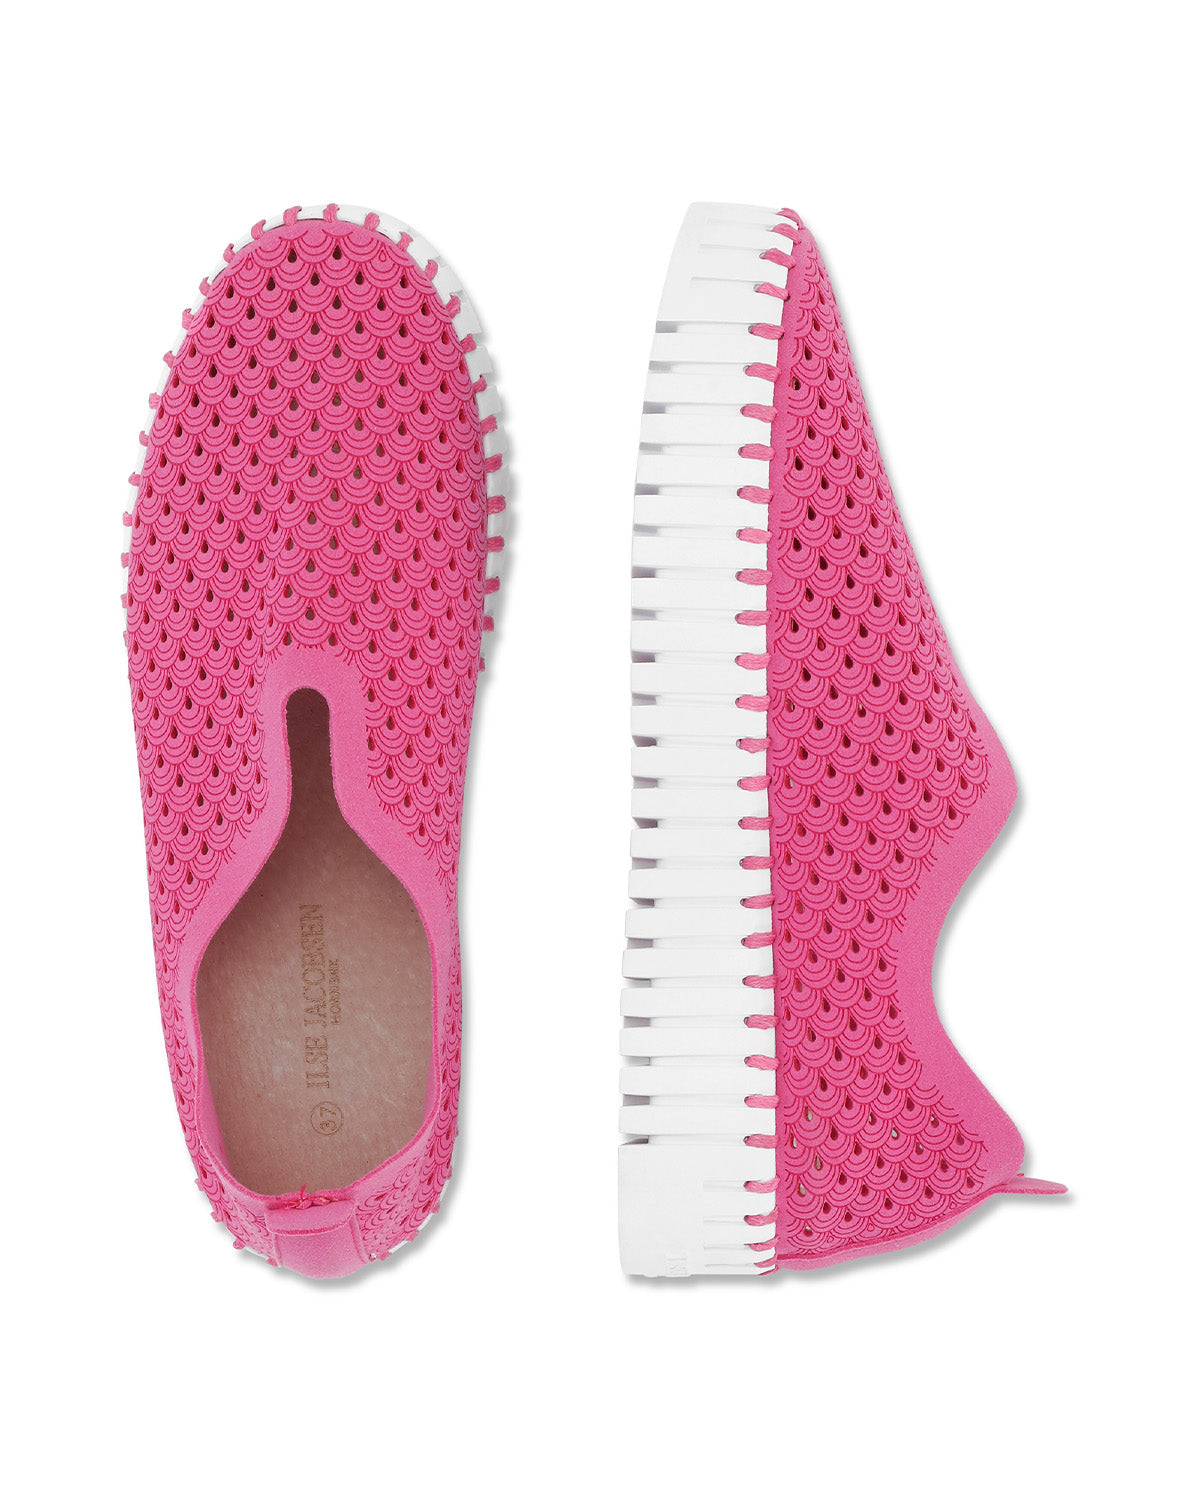 Slipper with plateau in color pink by Ilse Jacobsen